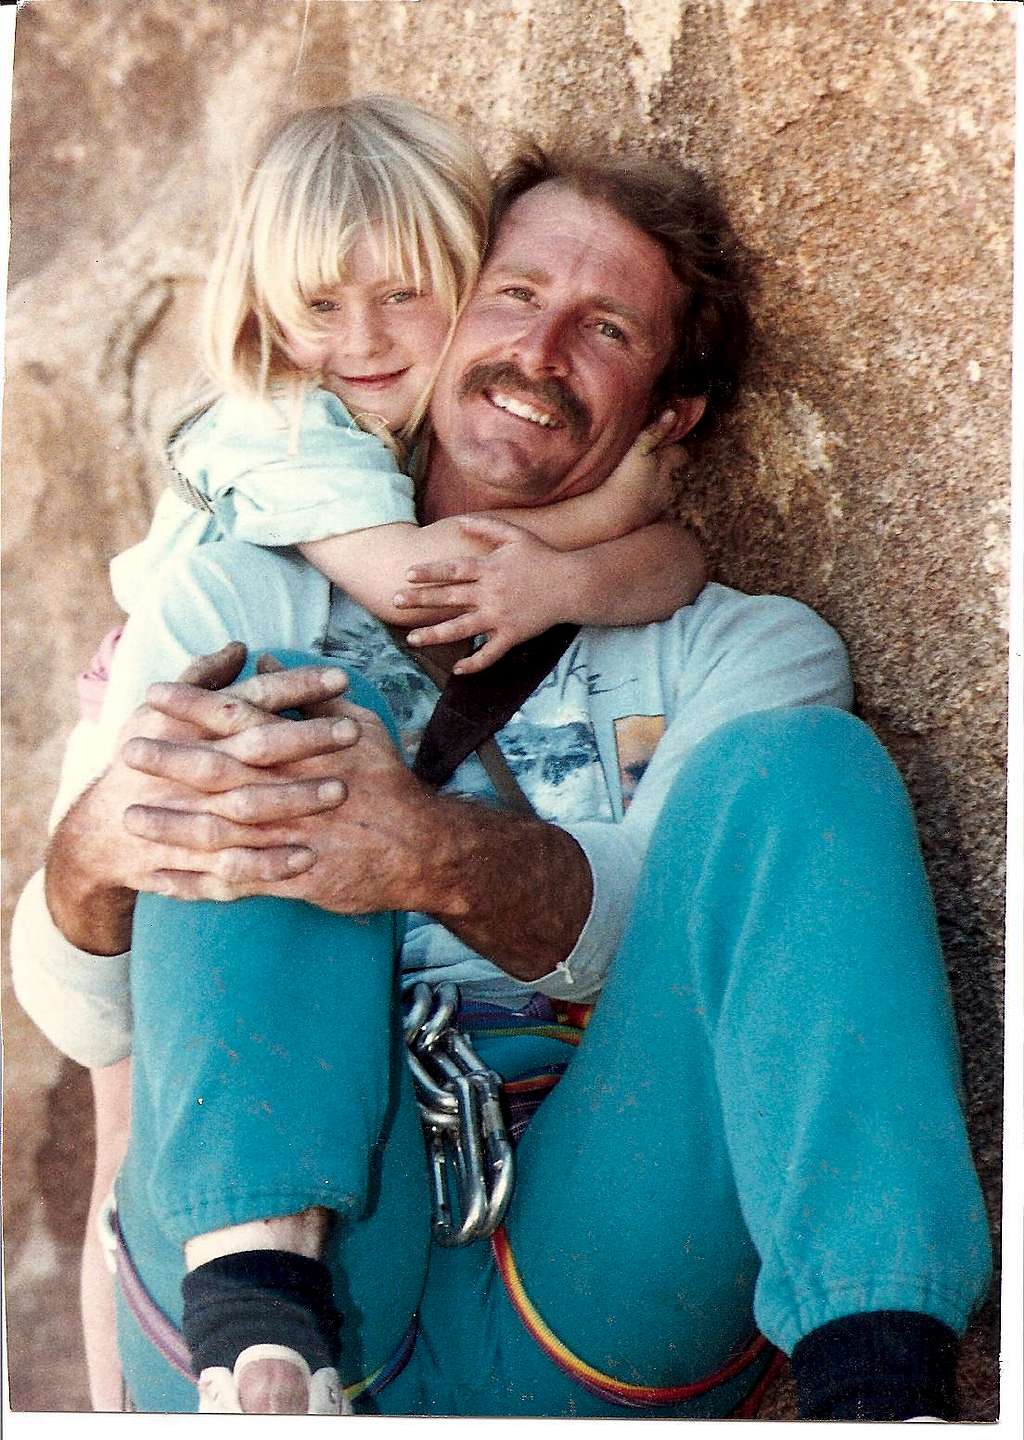 My daughter and me when she was 5 yrs. old climbing at Joshsua Tree State Park Calif.